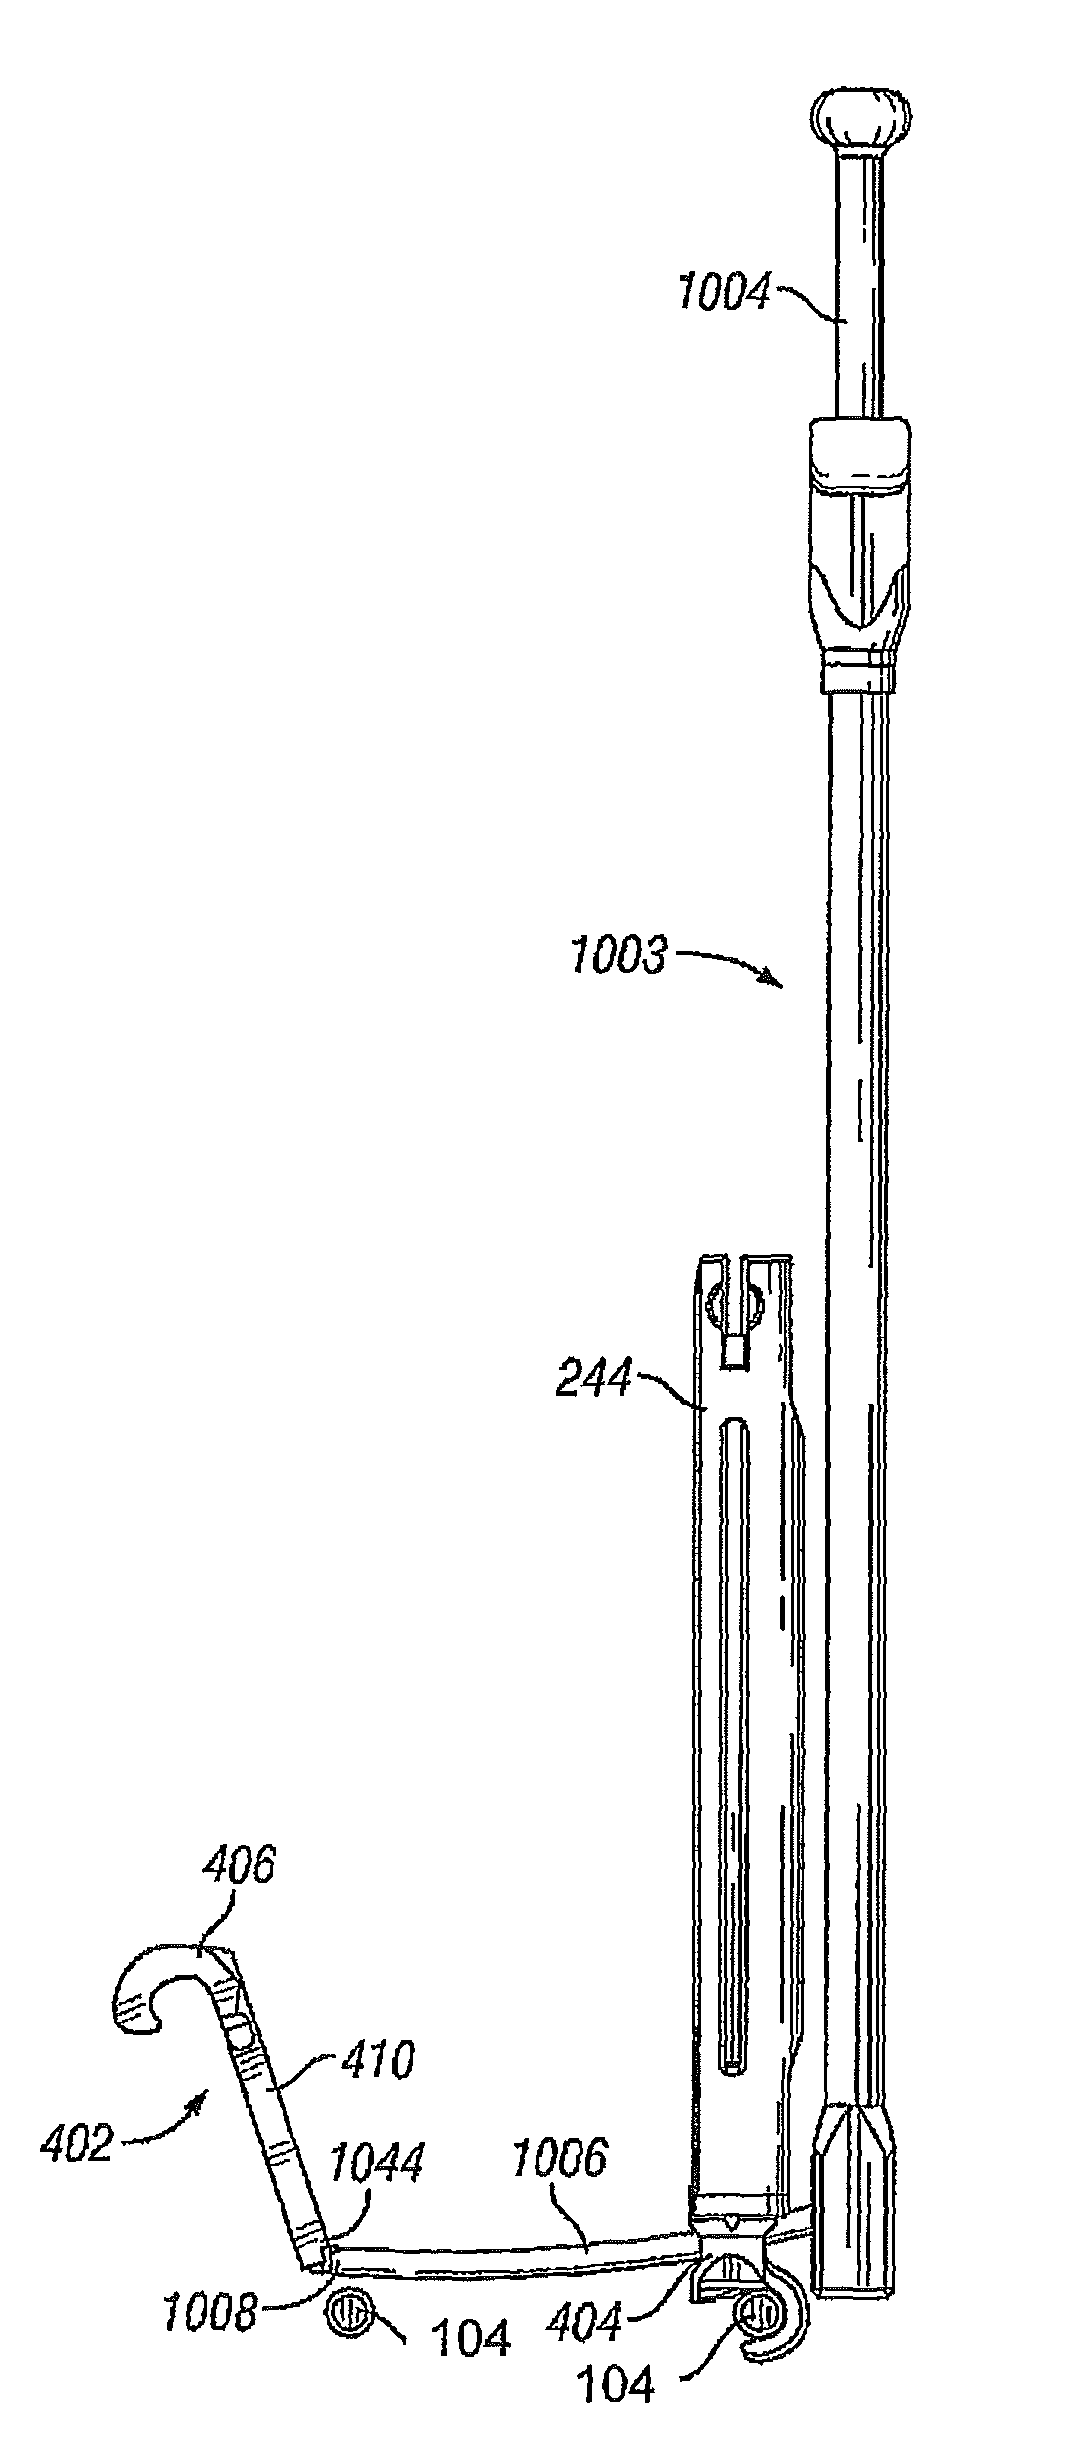 MIS crosslink apparatus and methods for spinal implant